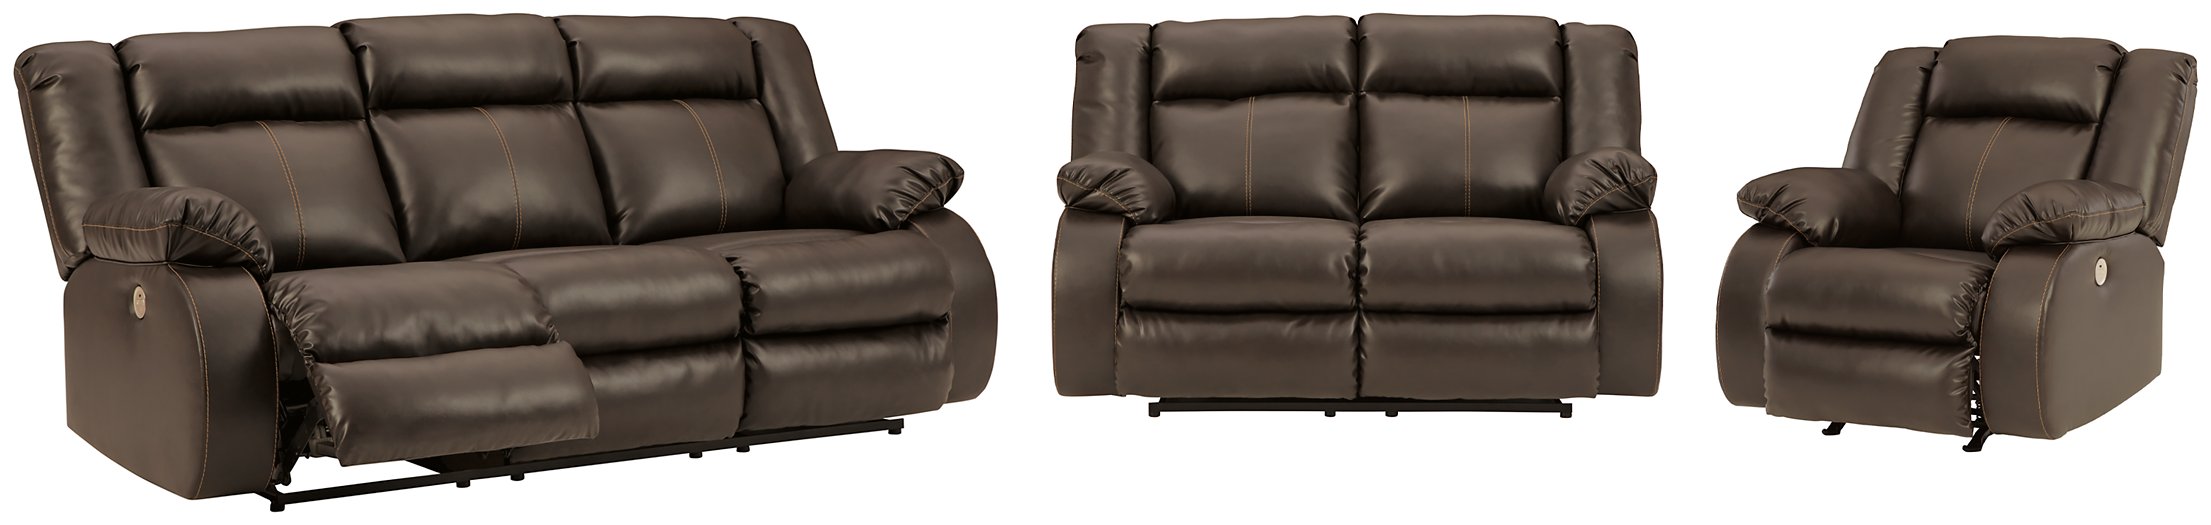 Denoron 3-Piece Upholstery Package